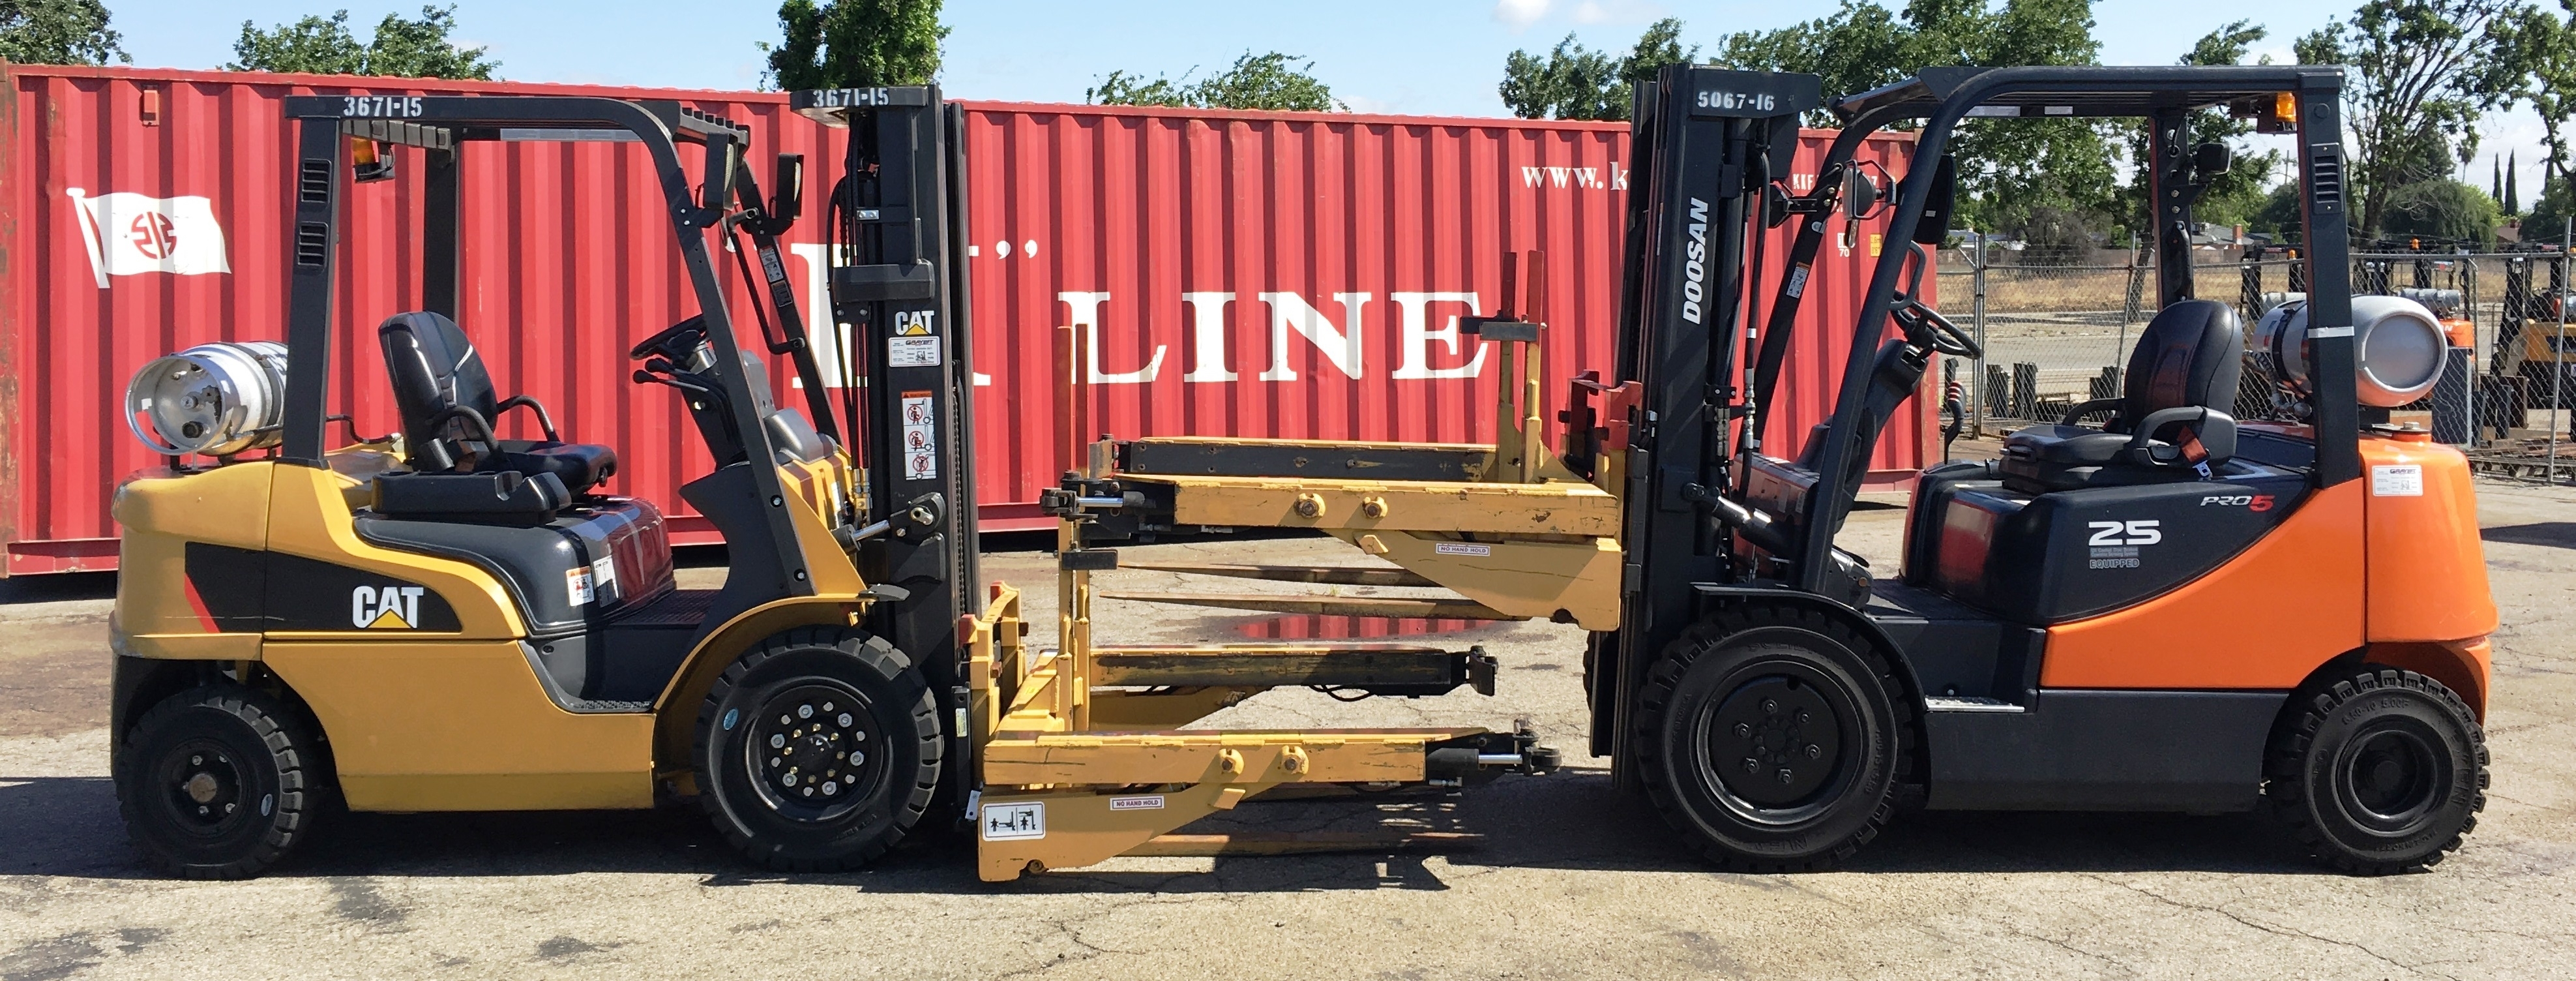 Dueling Forklifts with Bin Dumpers